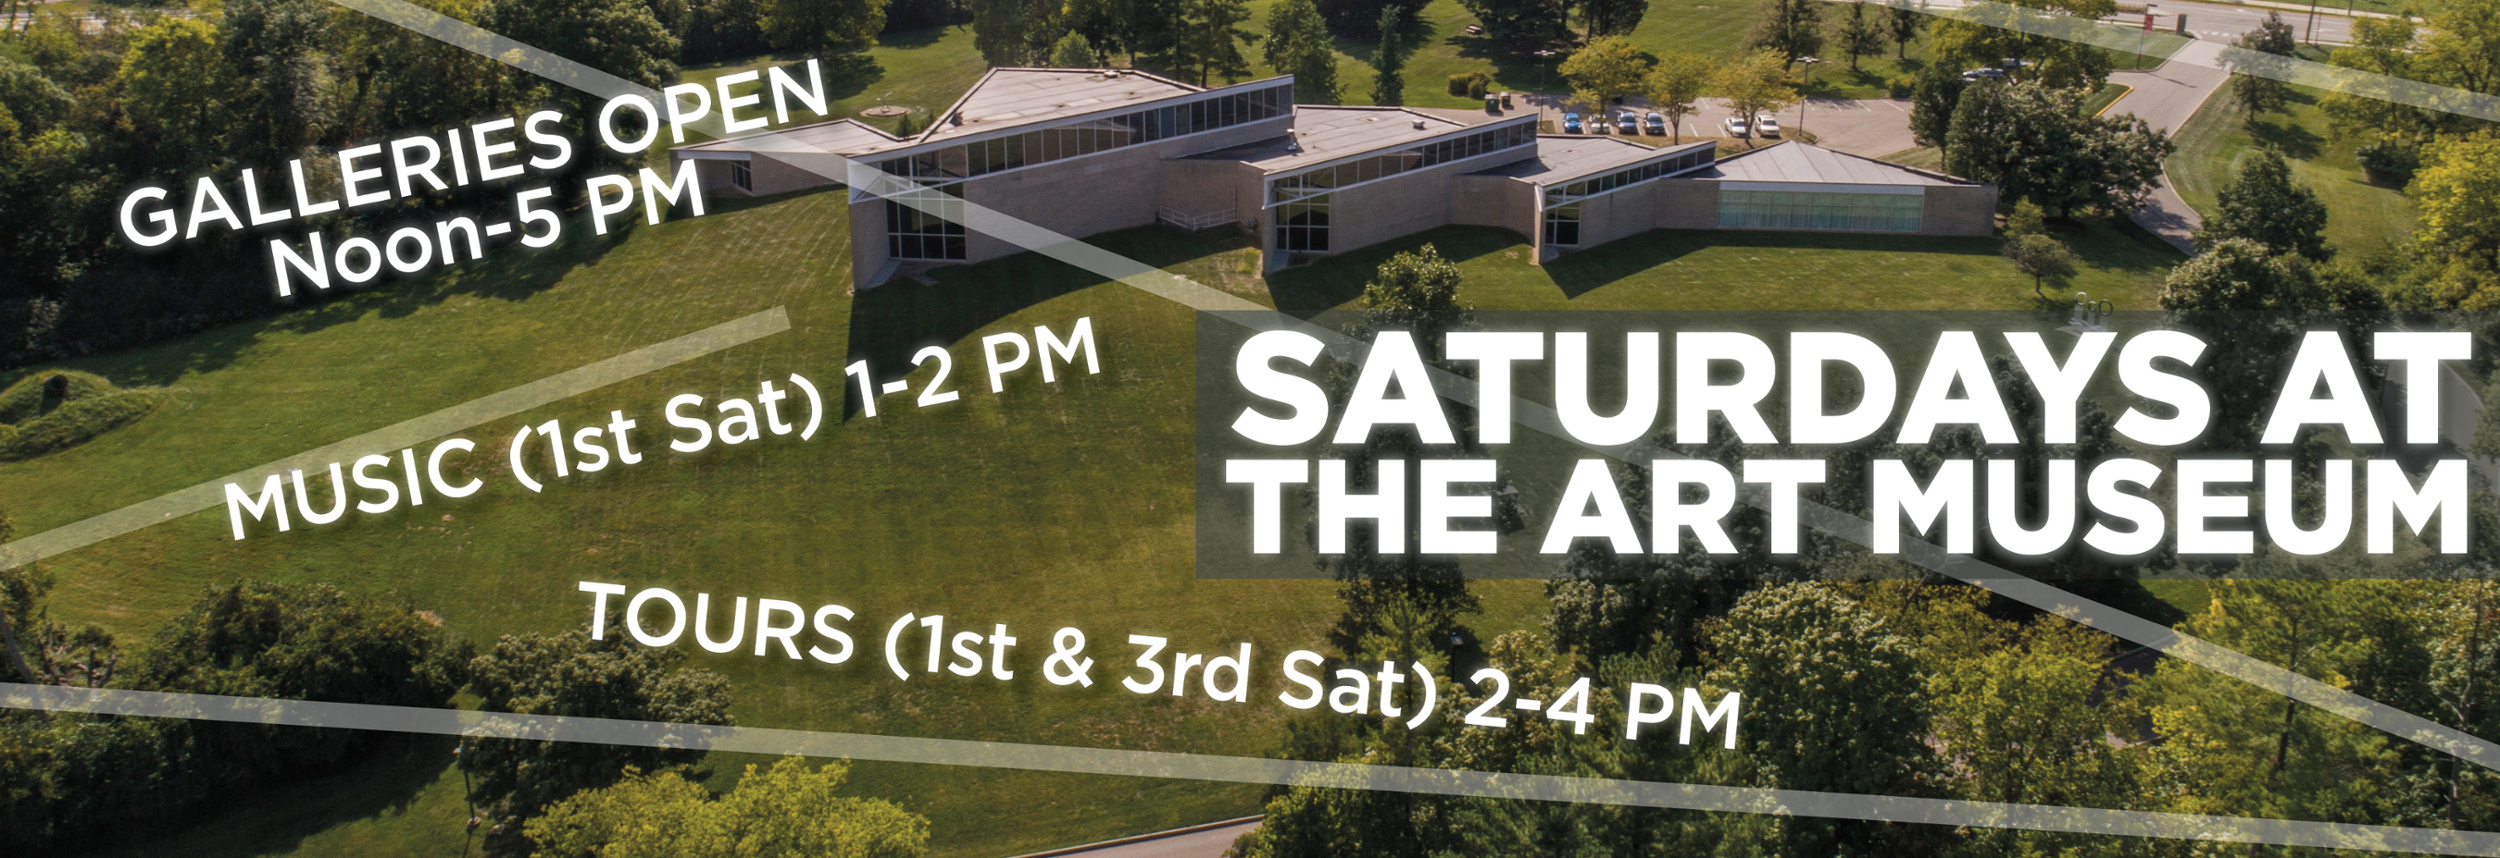 Saturdays at the Art Museum Open Noon-5 PM